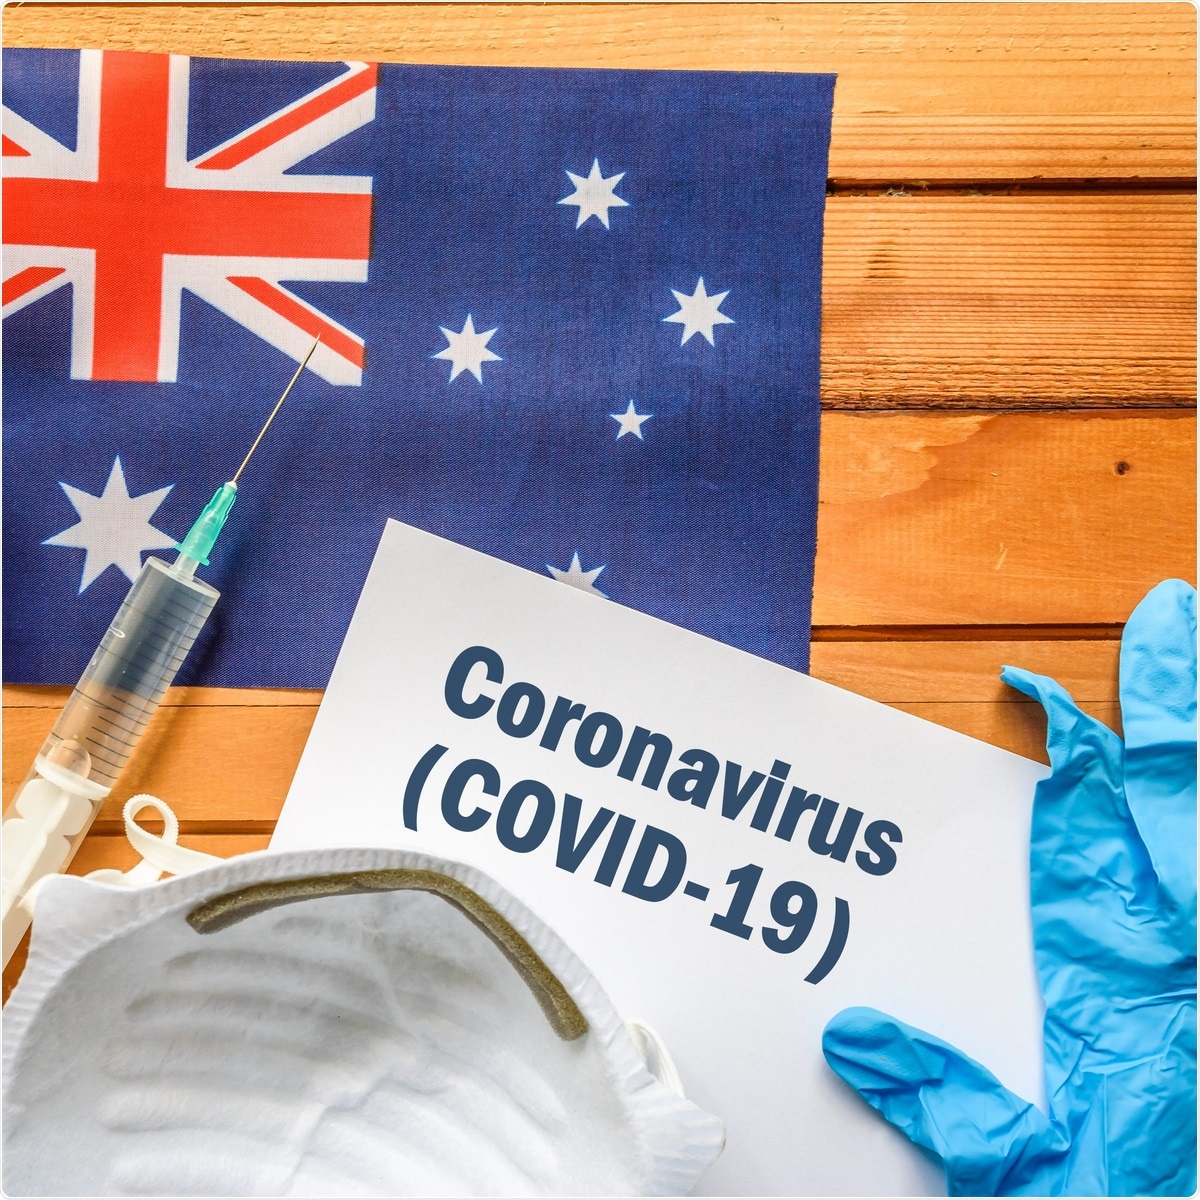 Study: COVID-19 vaccine hesitation and resistance: Correlate in a nationally representative longitudinal survey of the Australian population. Image Credit: GagoDesign / Shutterstock